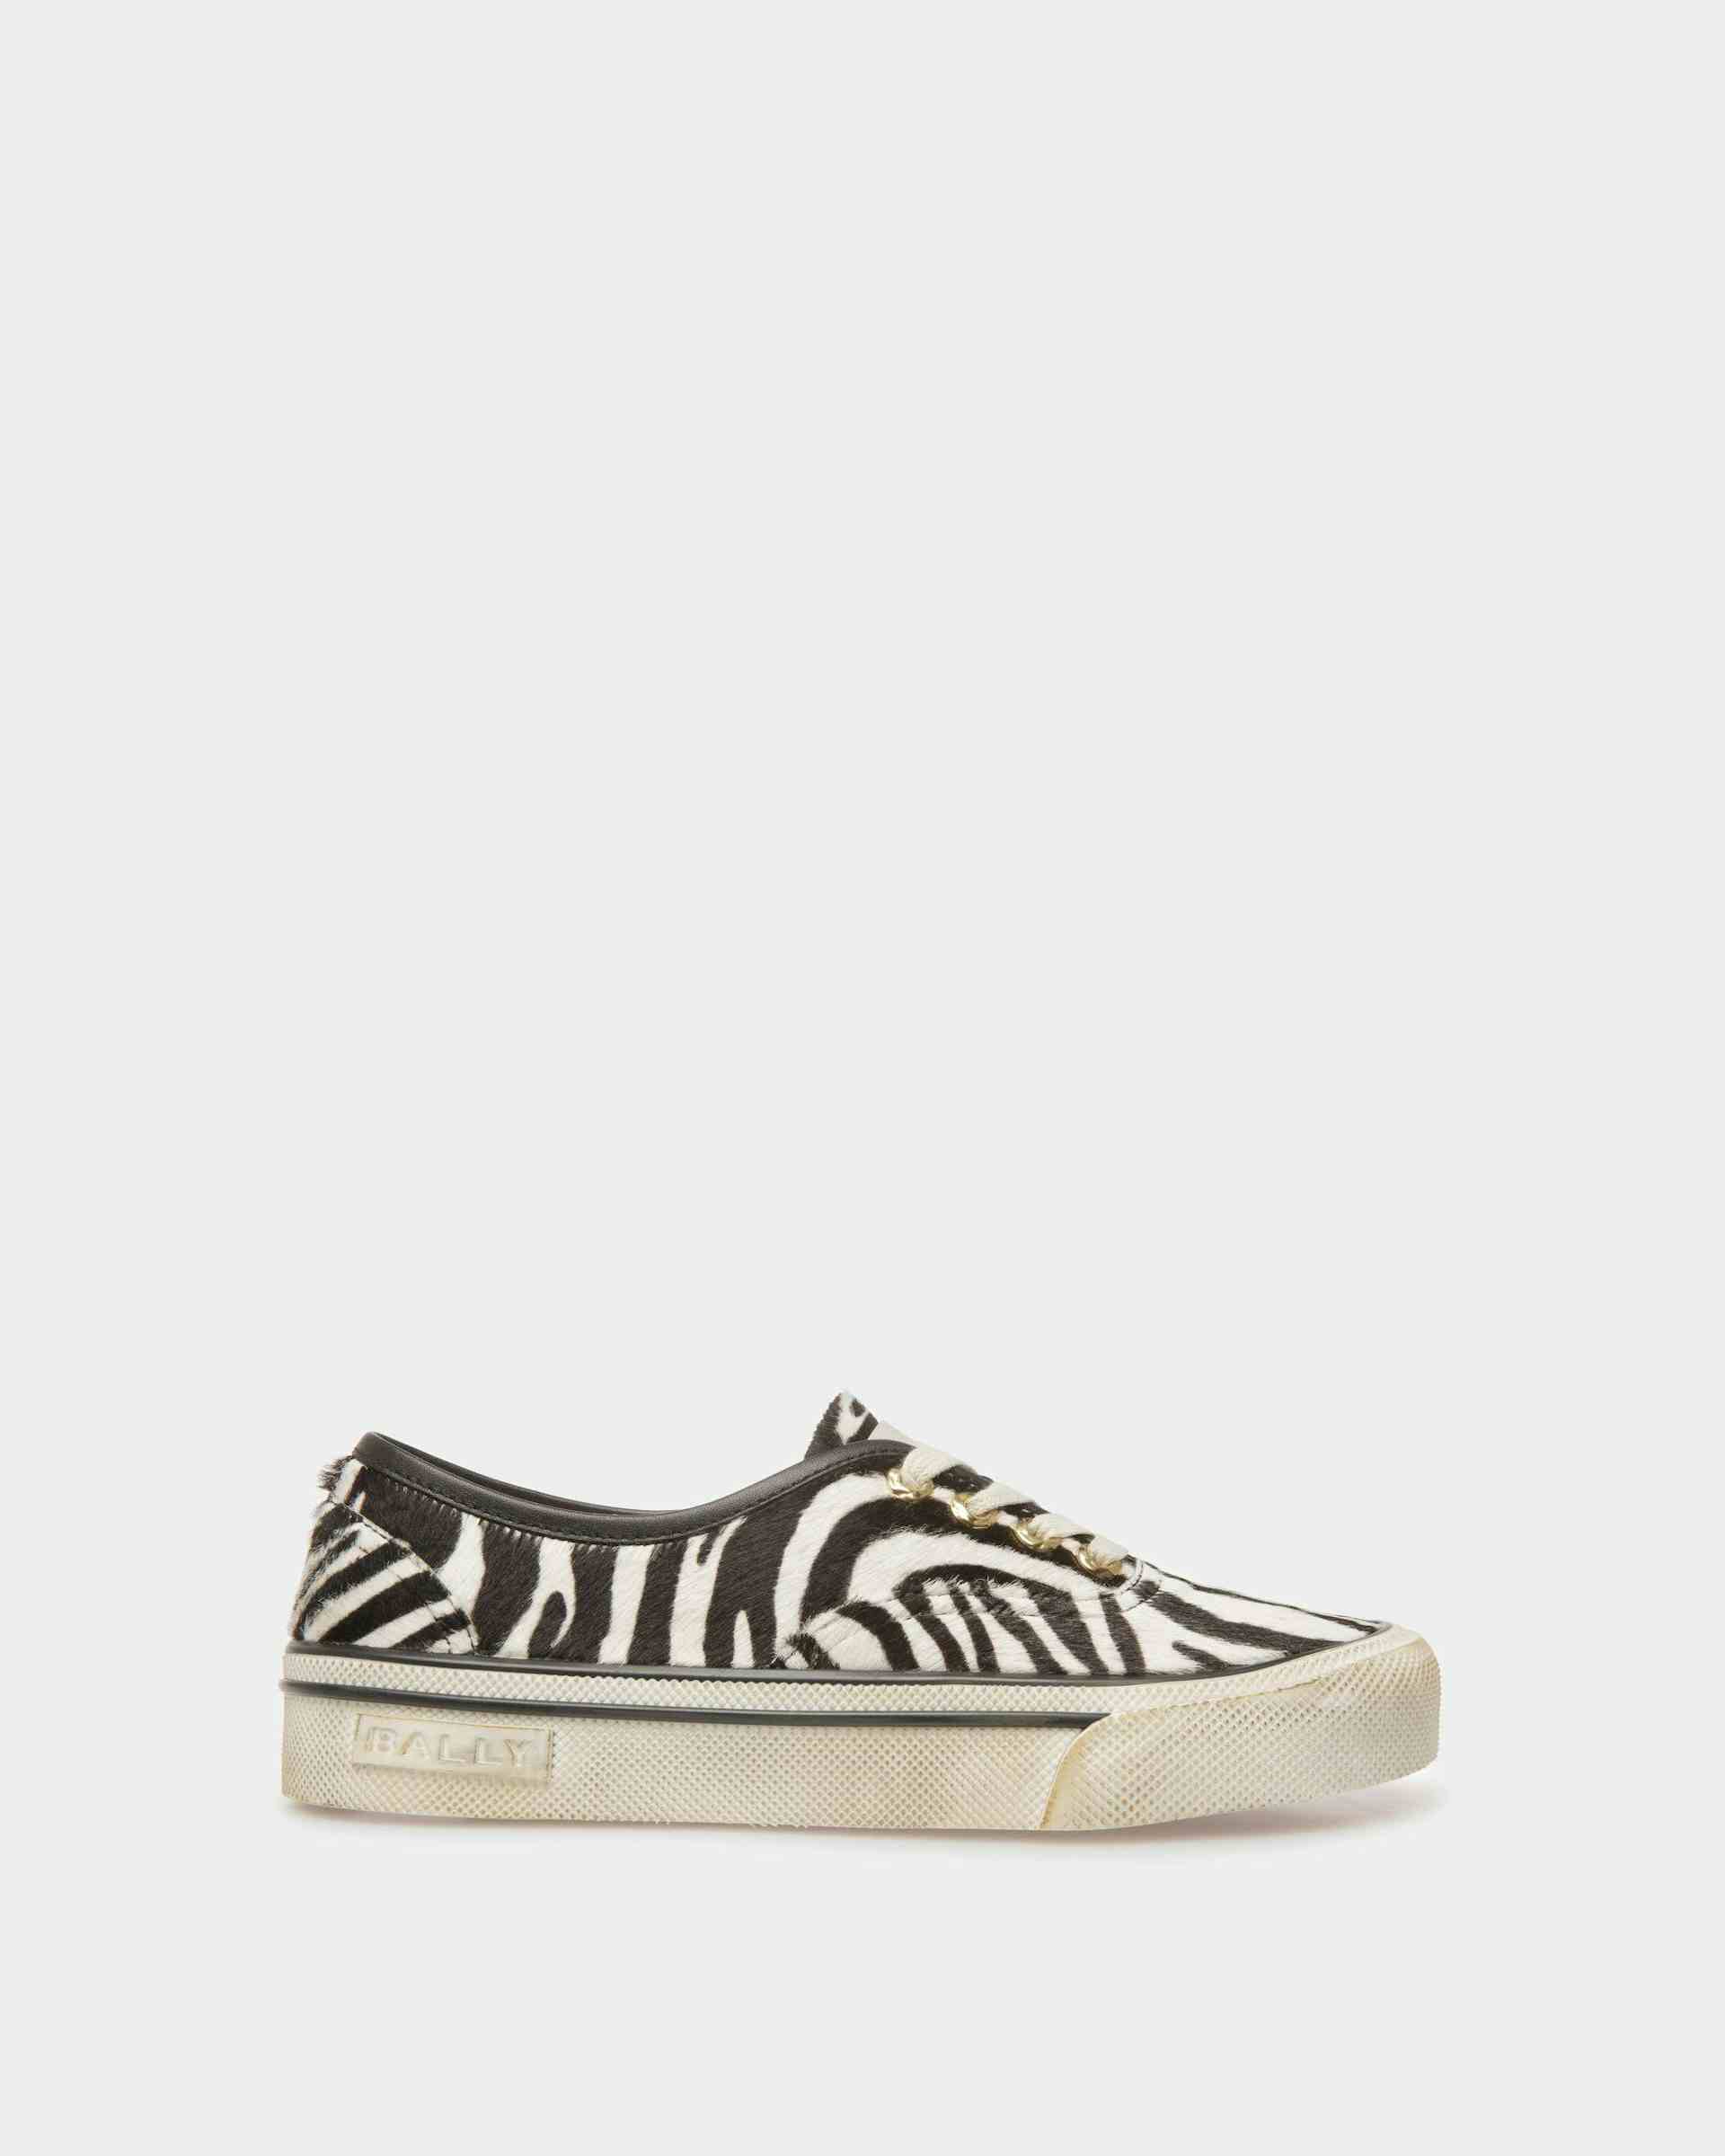 Santa Ana Sneakers In White And Black Haircalf Leather - Women's - Bally